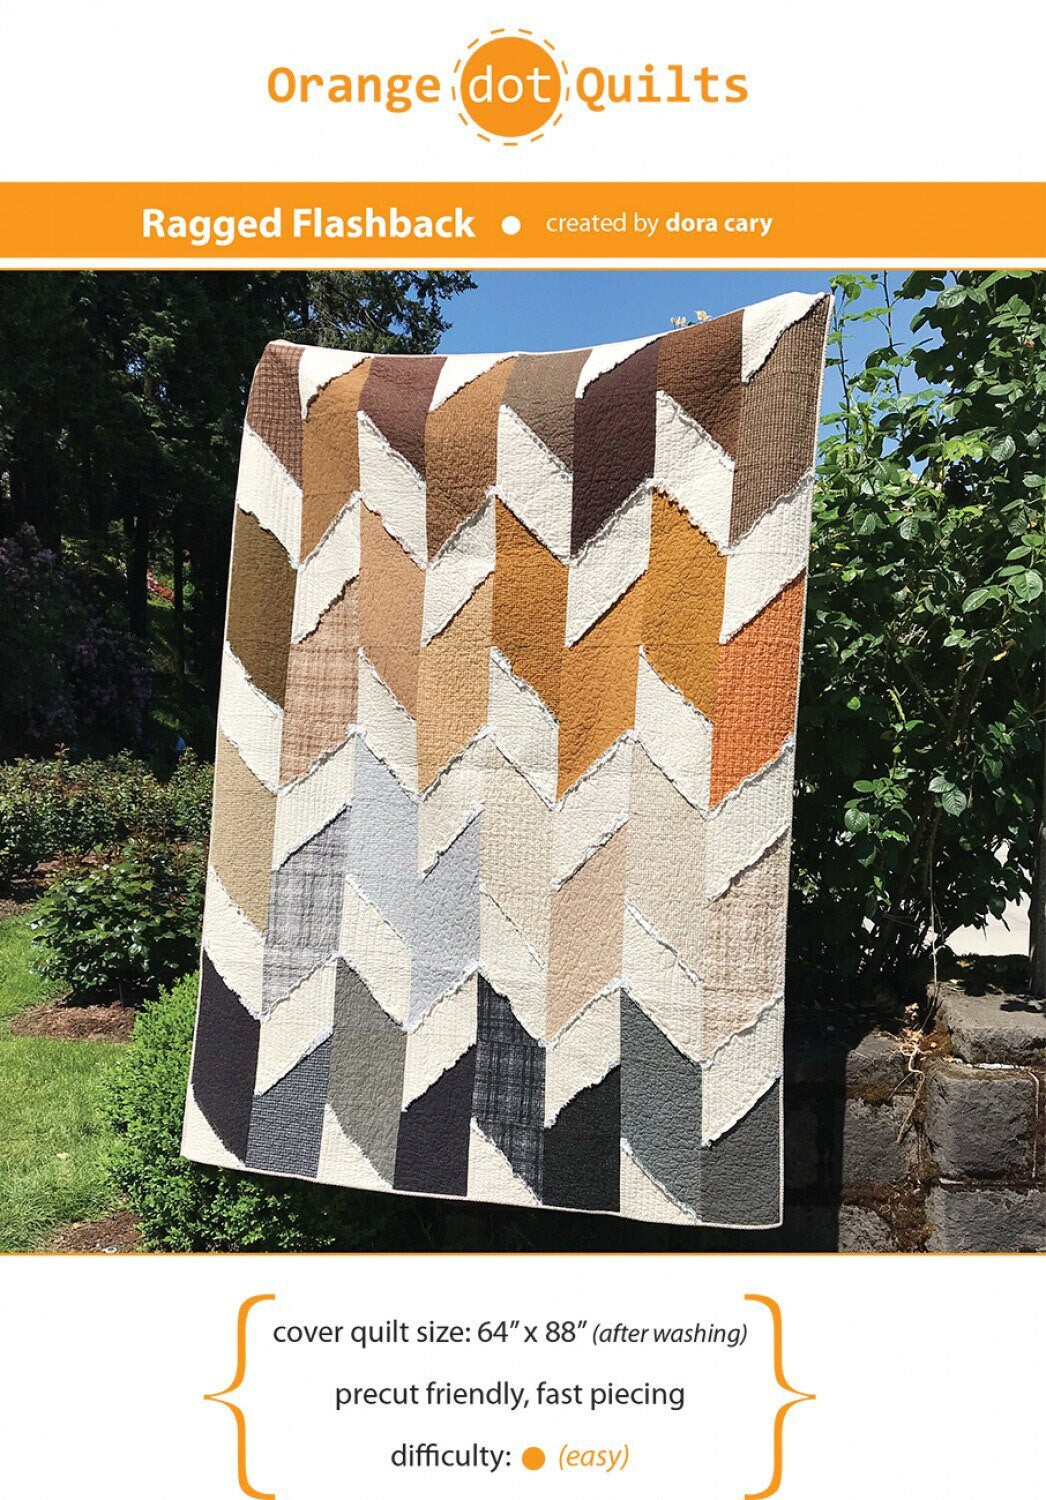 Ragged Flashback Quilt Pattern - Orange Dot Quilts - Dora Cary - Easy Quilt Pattern